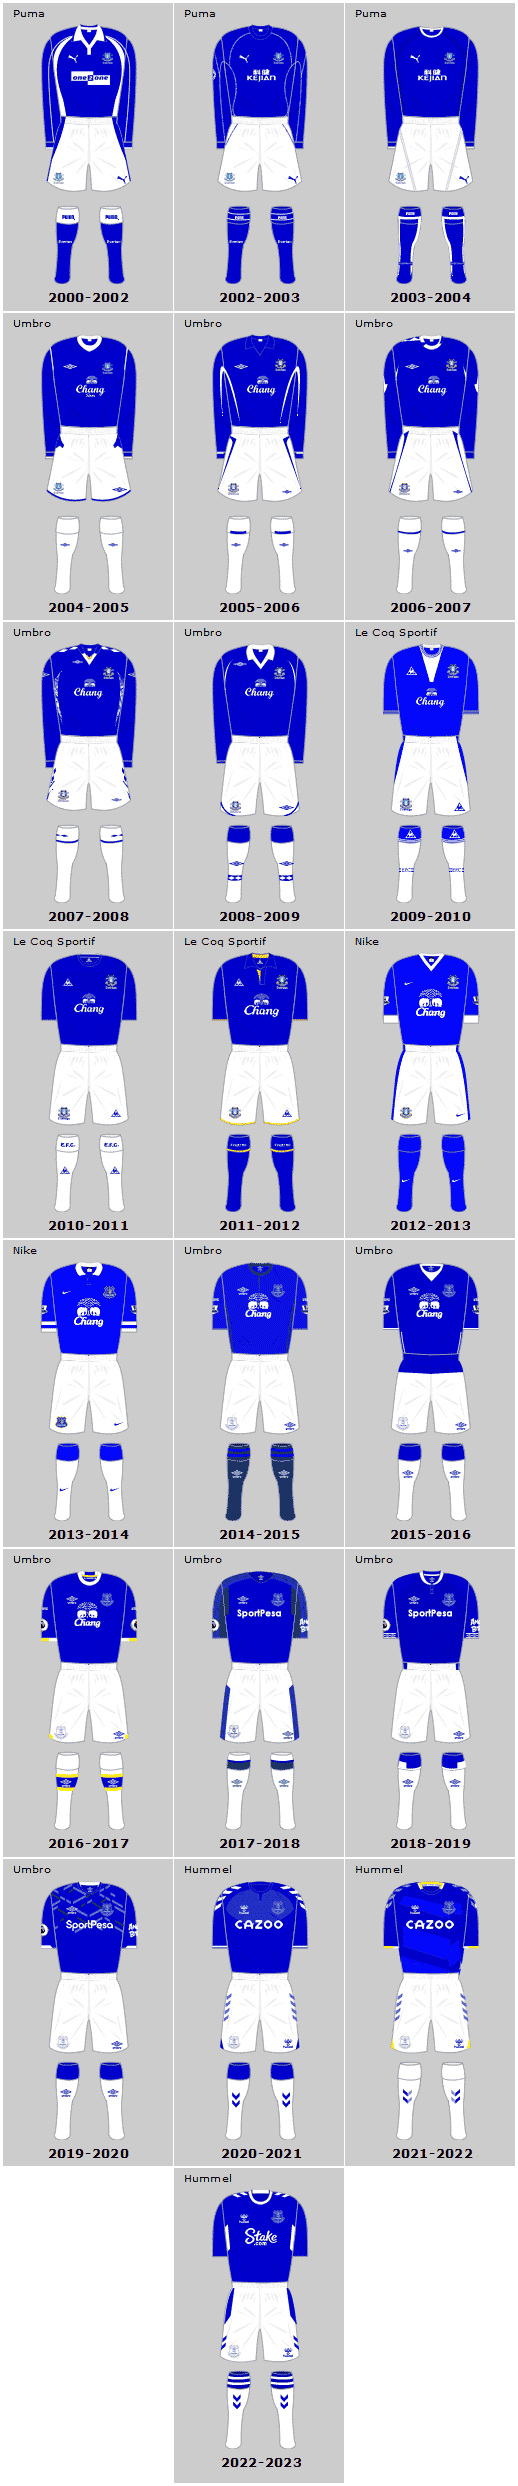 Everton FC 21st Century Home Playing Kits